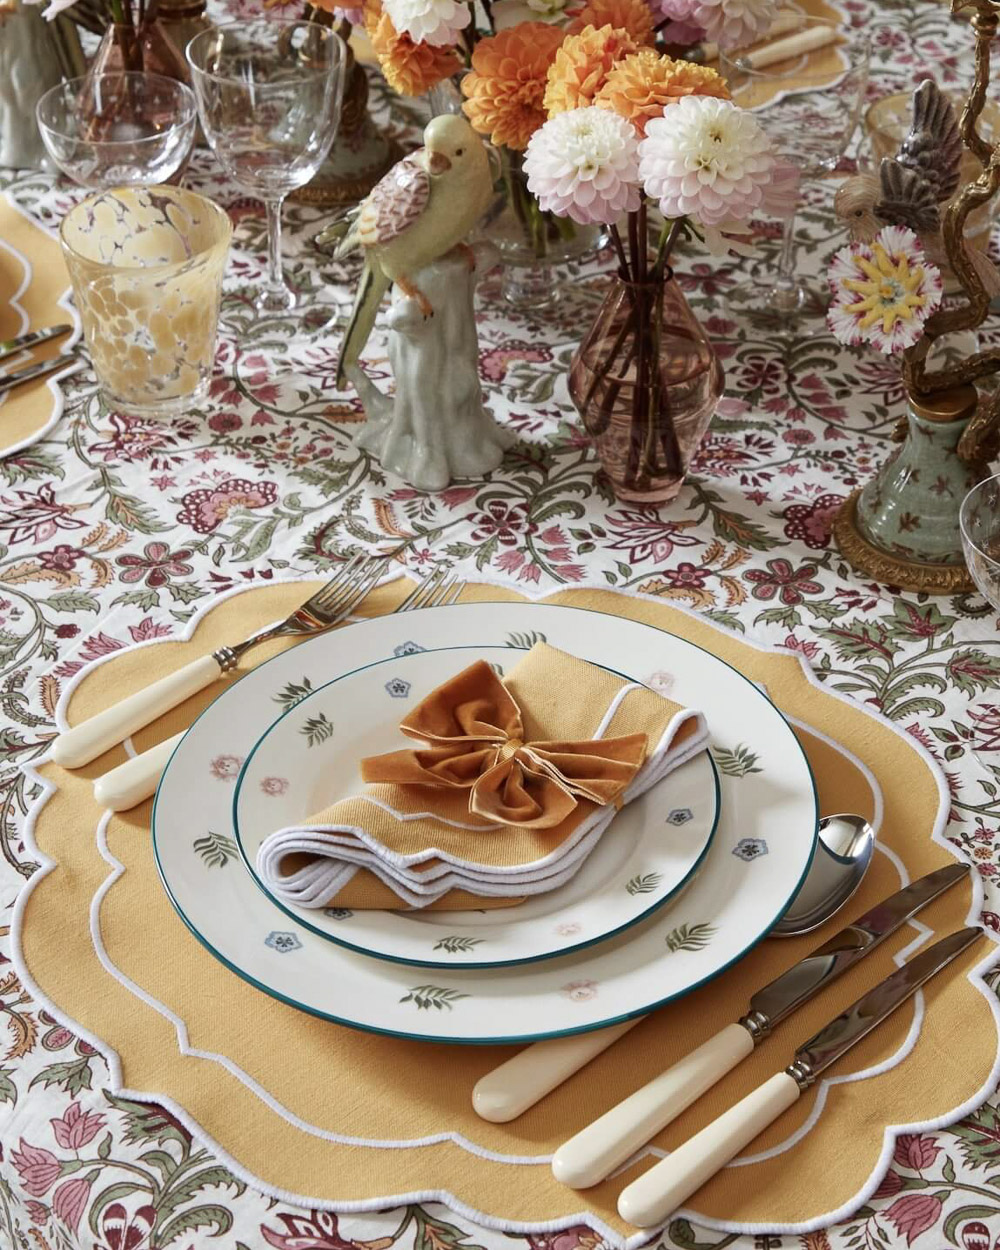 Inspiration for Your Thanksgiving Table and Registry